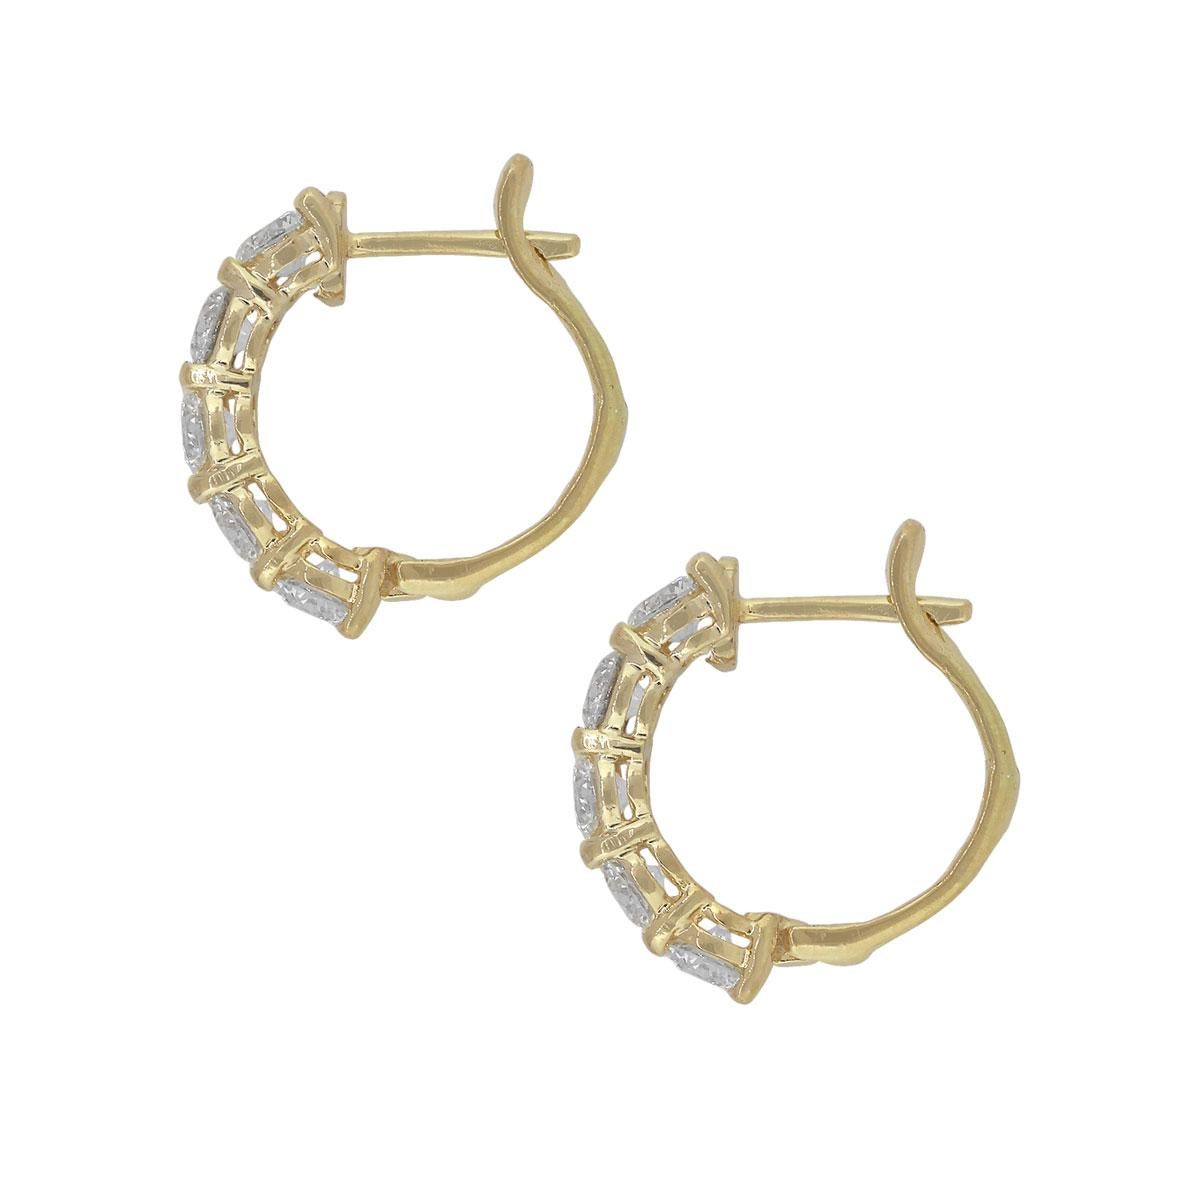 Material: 14k yellow gold
Diamond Details: Approx. 1.78ctw of round cut diamonds. Diamonds are G/H in color and VS in clarity
Earring Measurements: 0.62